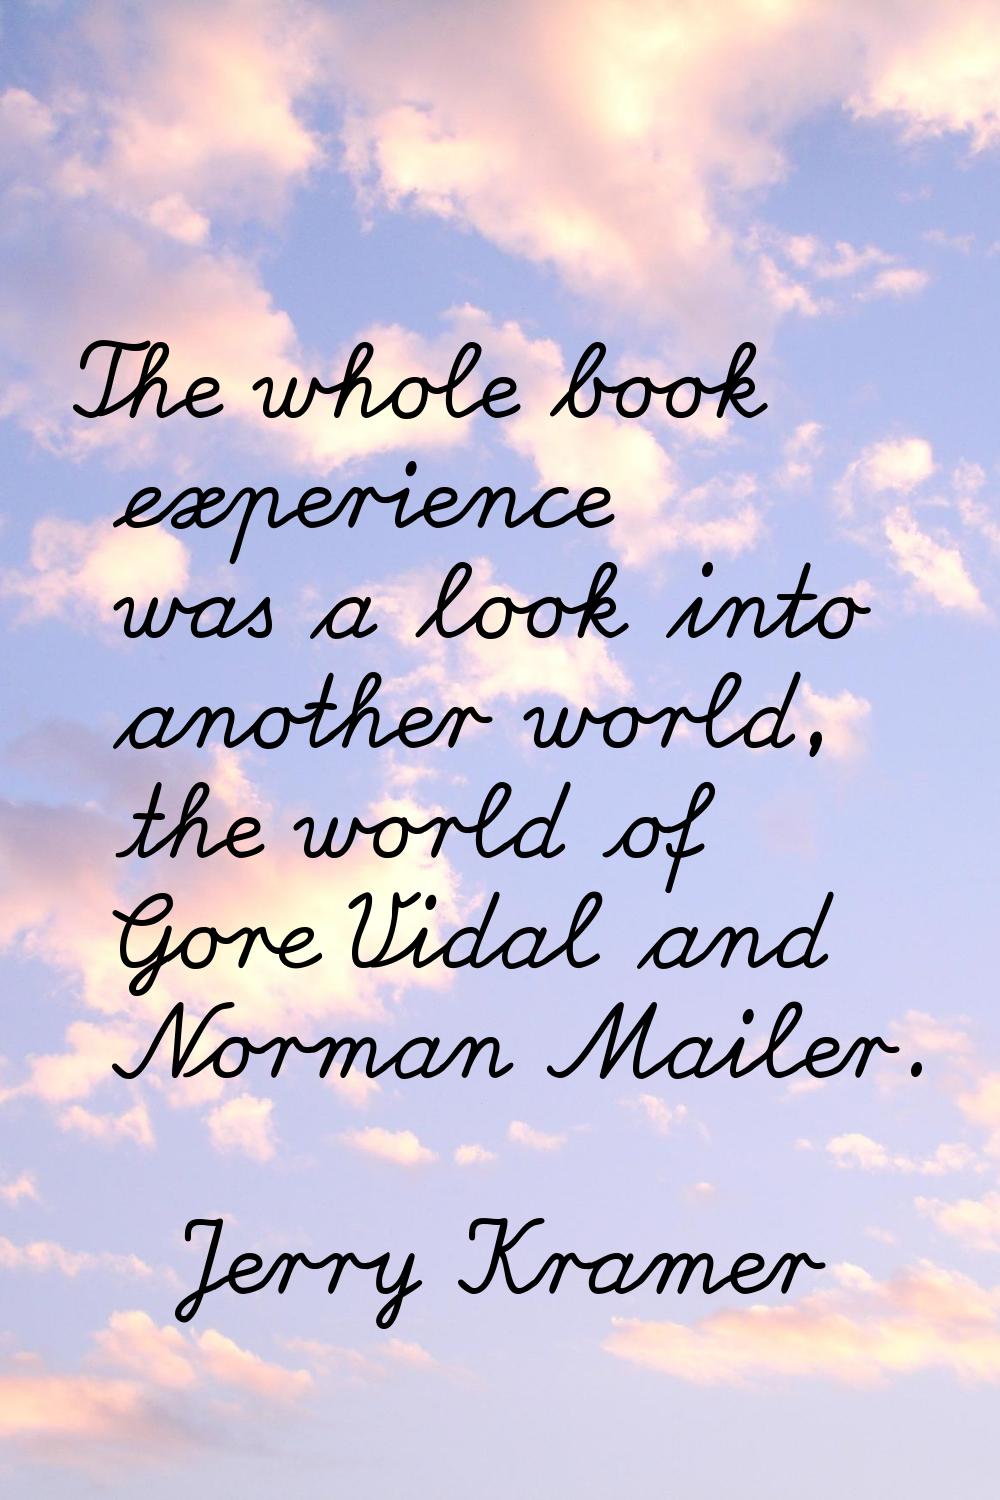 The whole book experience was a look into another world, the world of Gore Vidal and Norman Mailer.